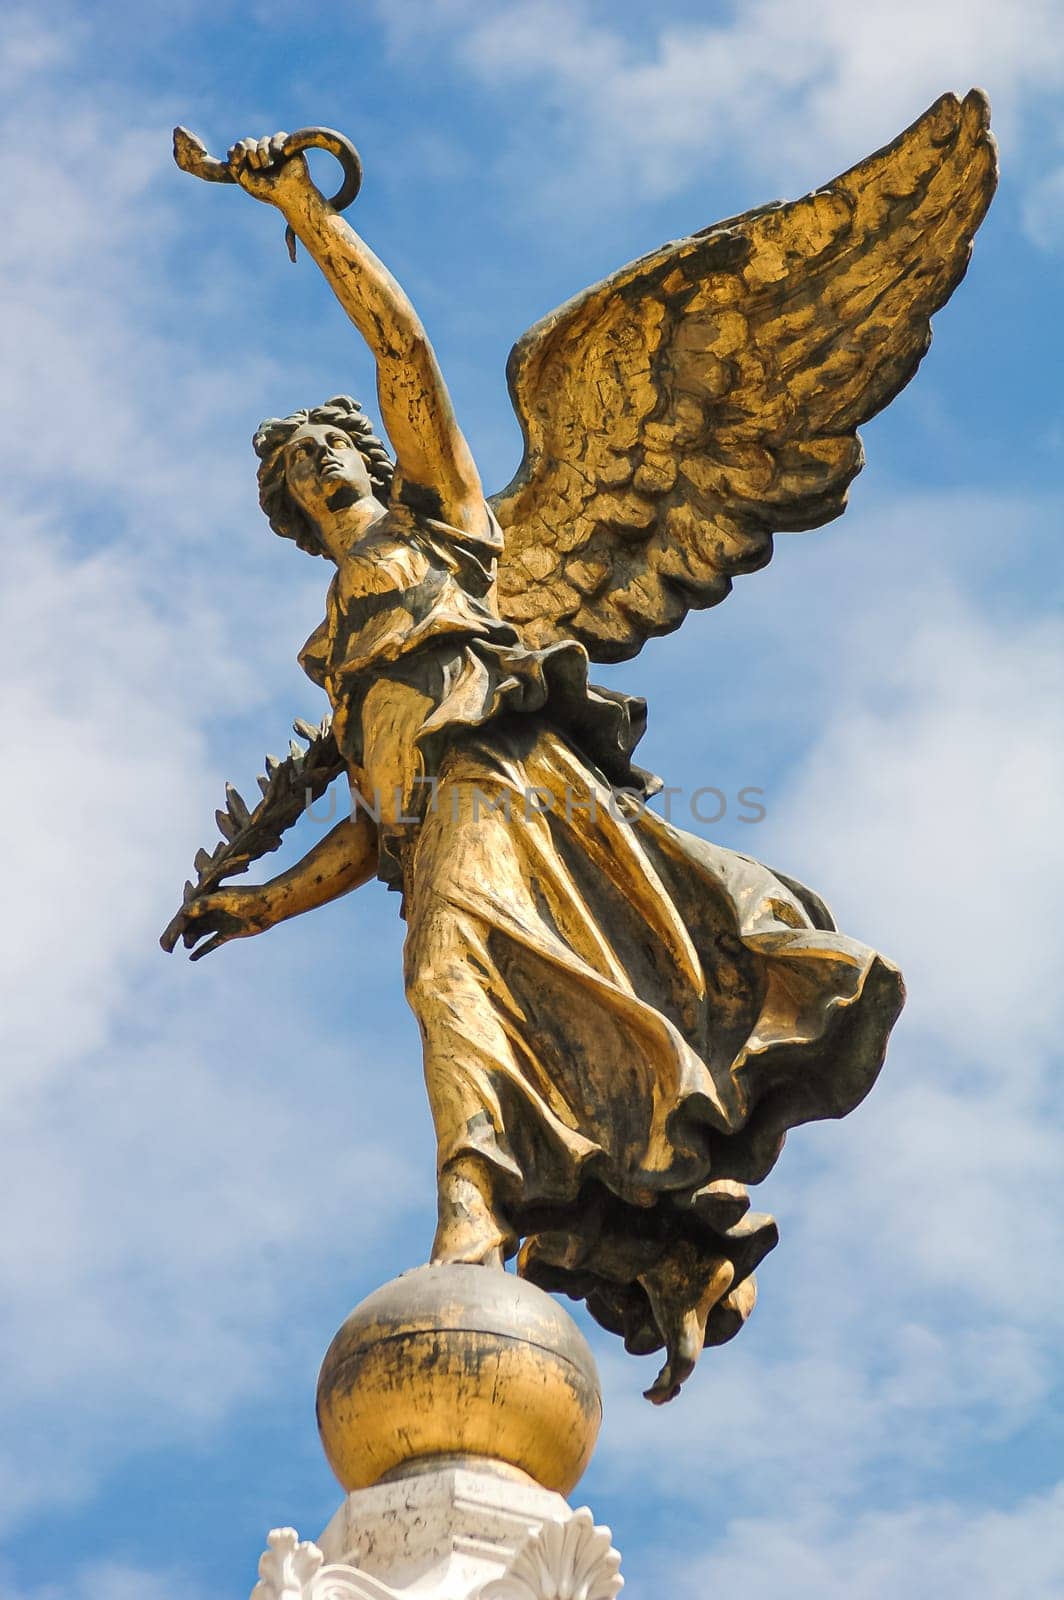 Winged Victoria bronze statue in the Vittoriano, monument to the first king of Italy Victor Emmanuel II, city of Rome